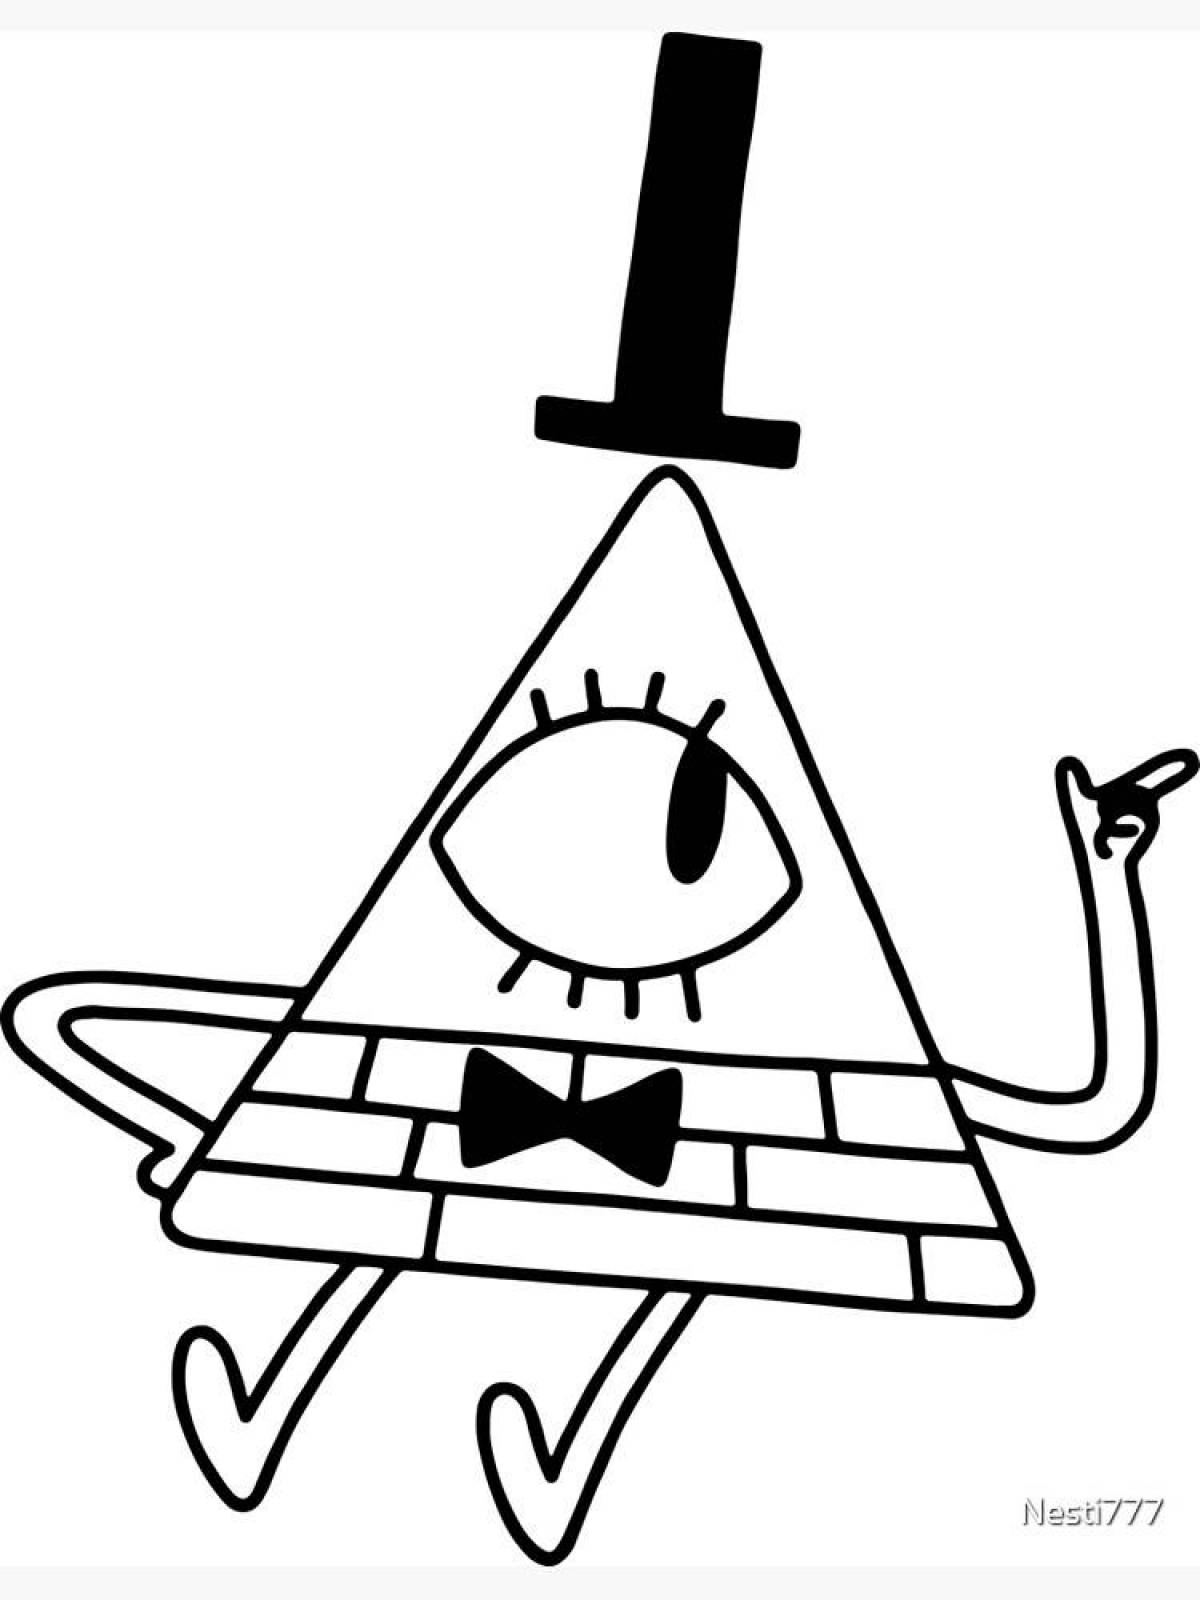 Bill Cipher's mesmerizing coloring page